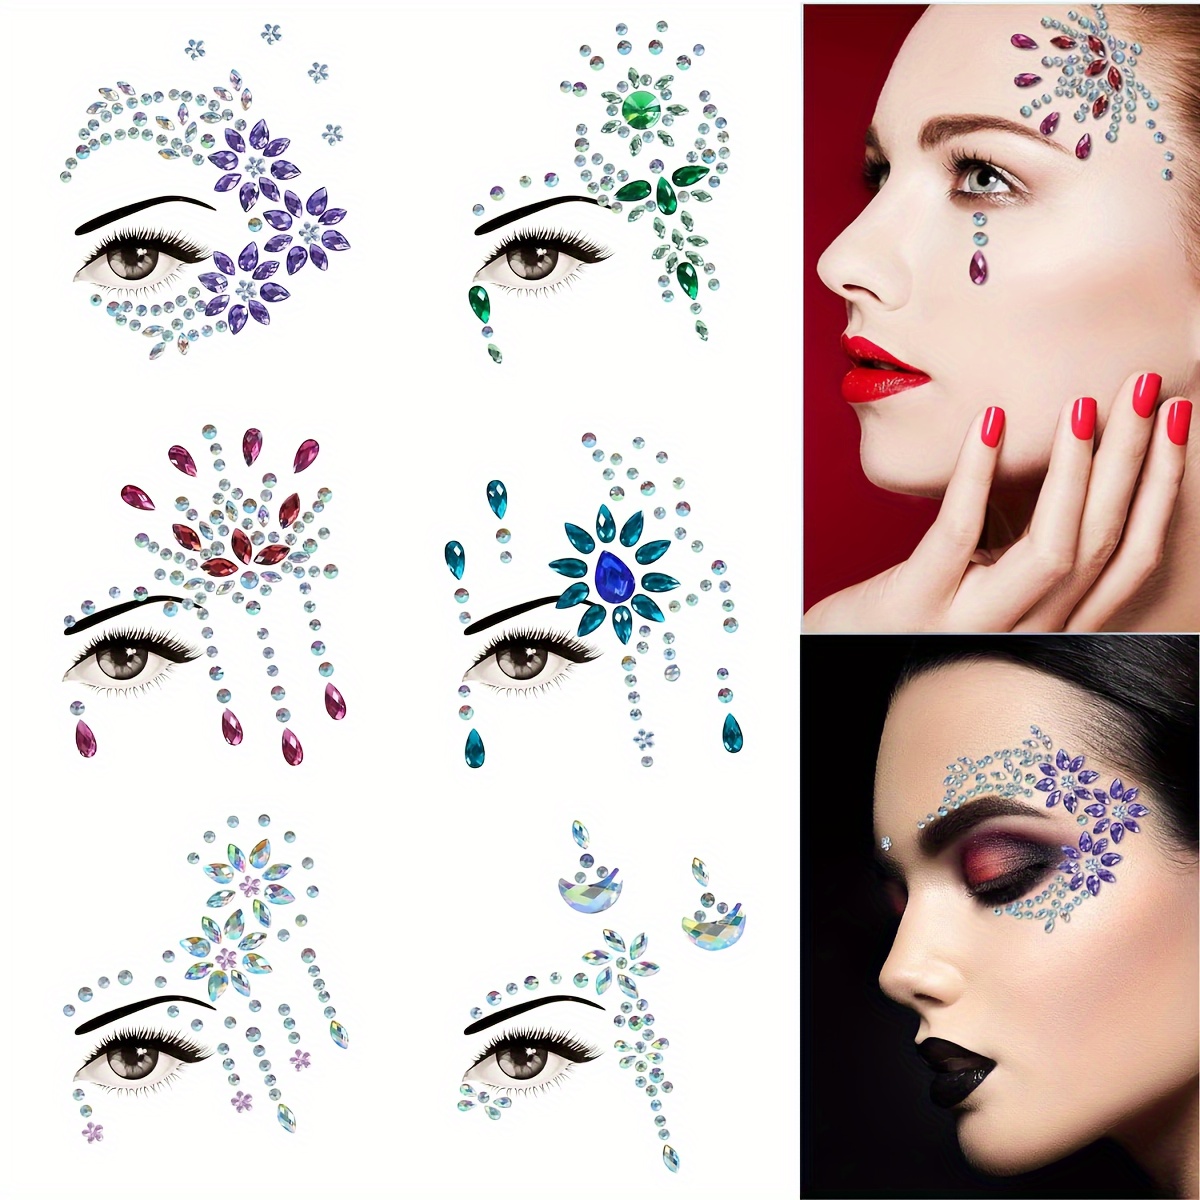 

6-piece Sparkling Face Gems - Rhinestone & Crystal Stickers For Eyes And Body, Perfect For Rave Festivals & Special Occasions